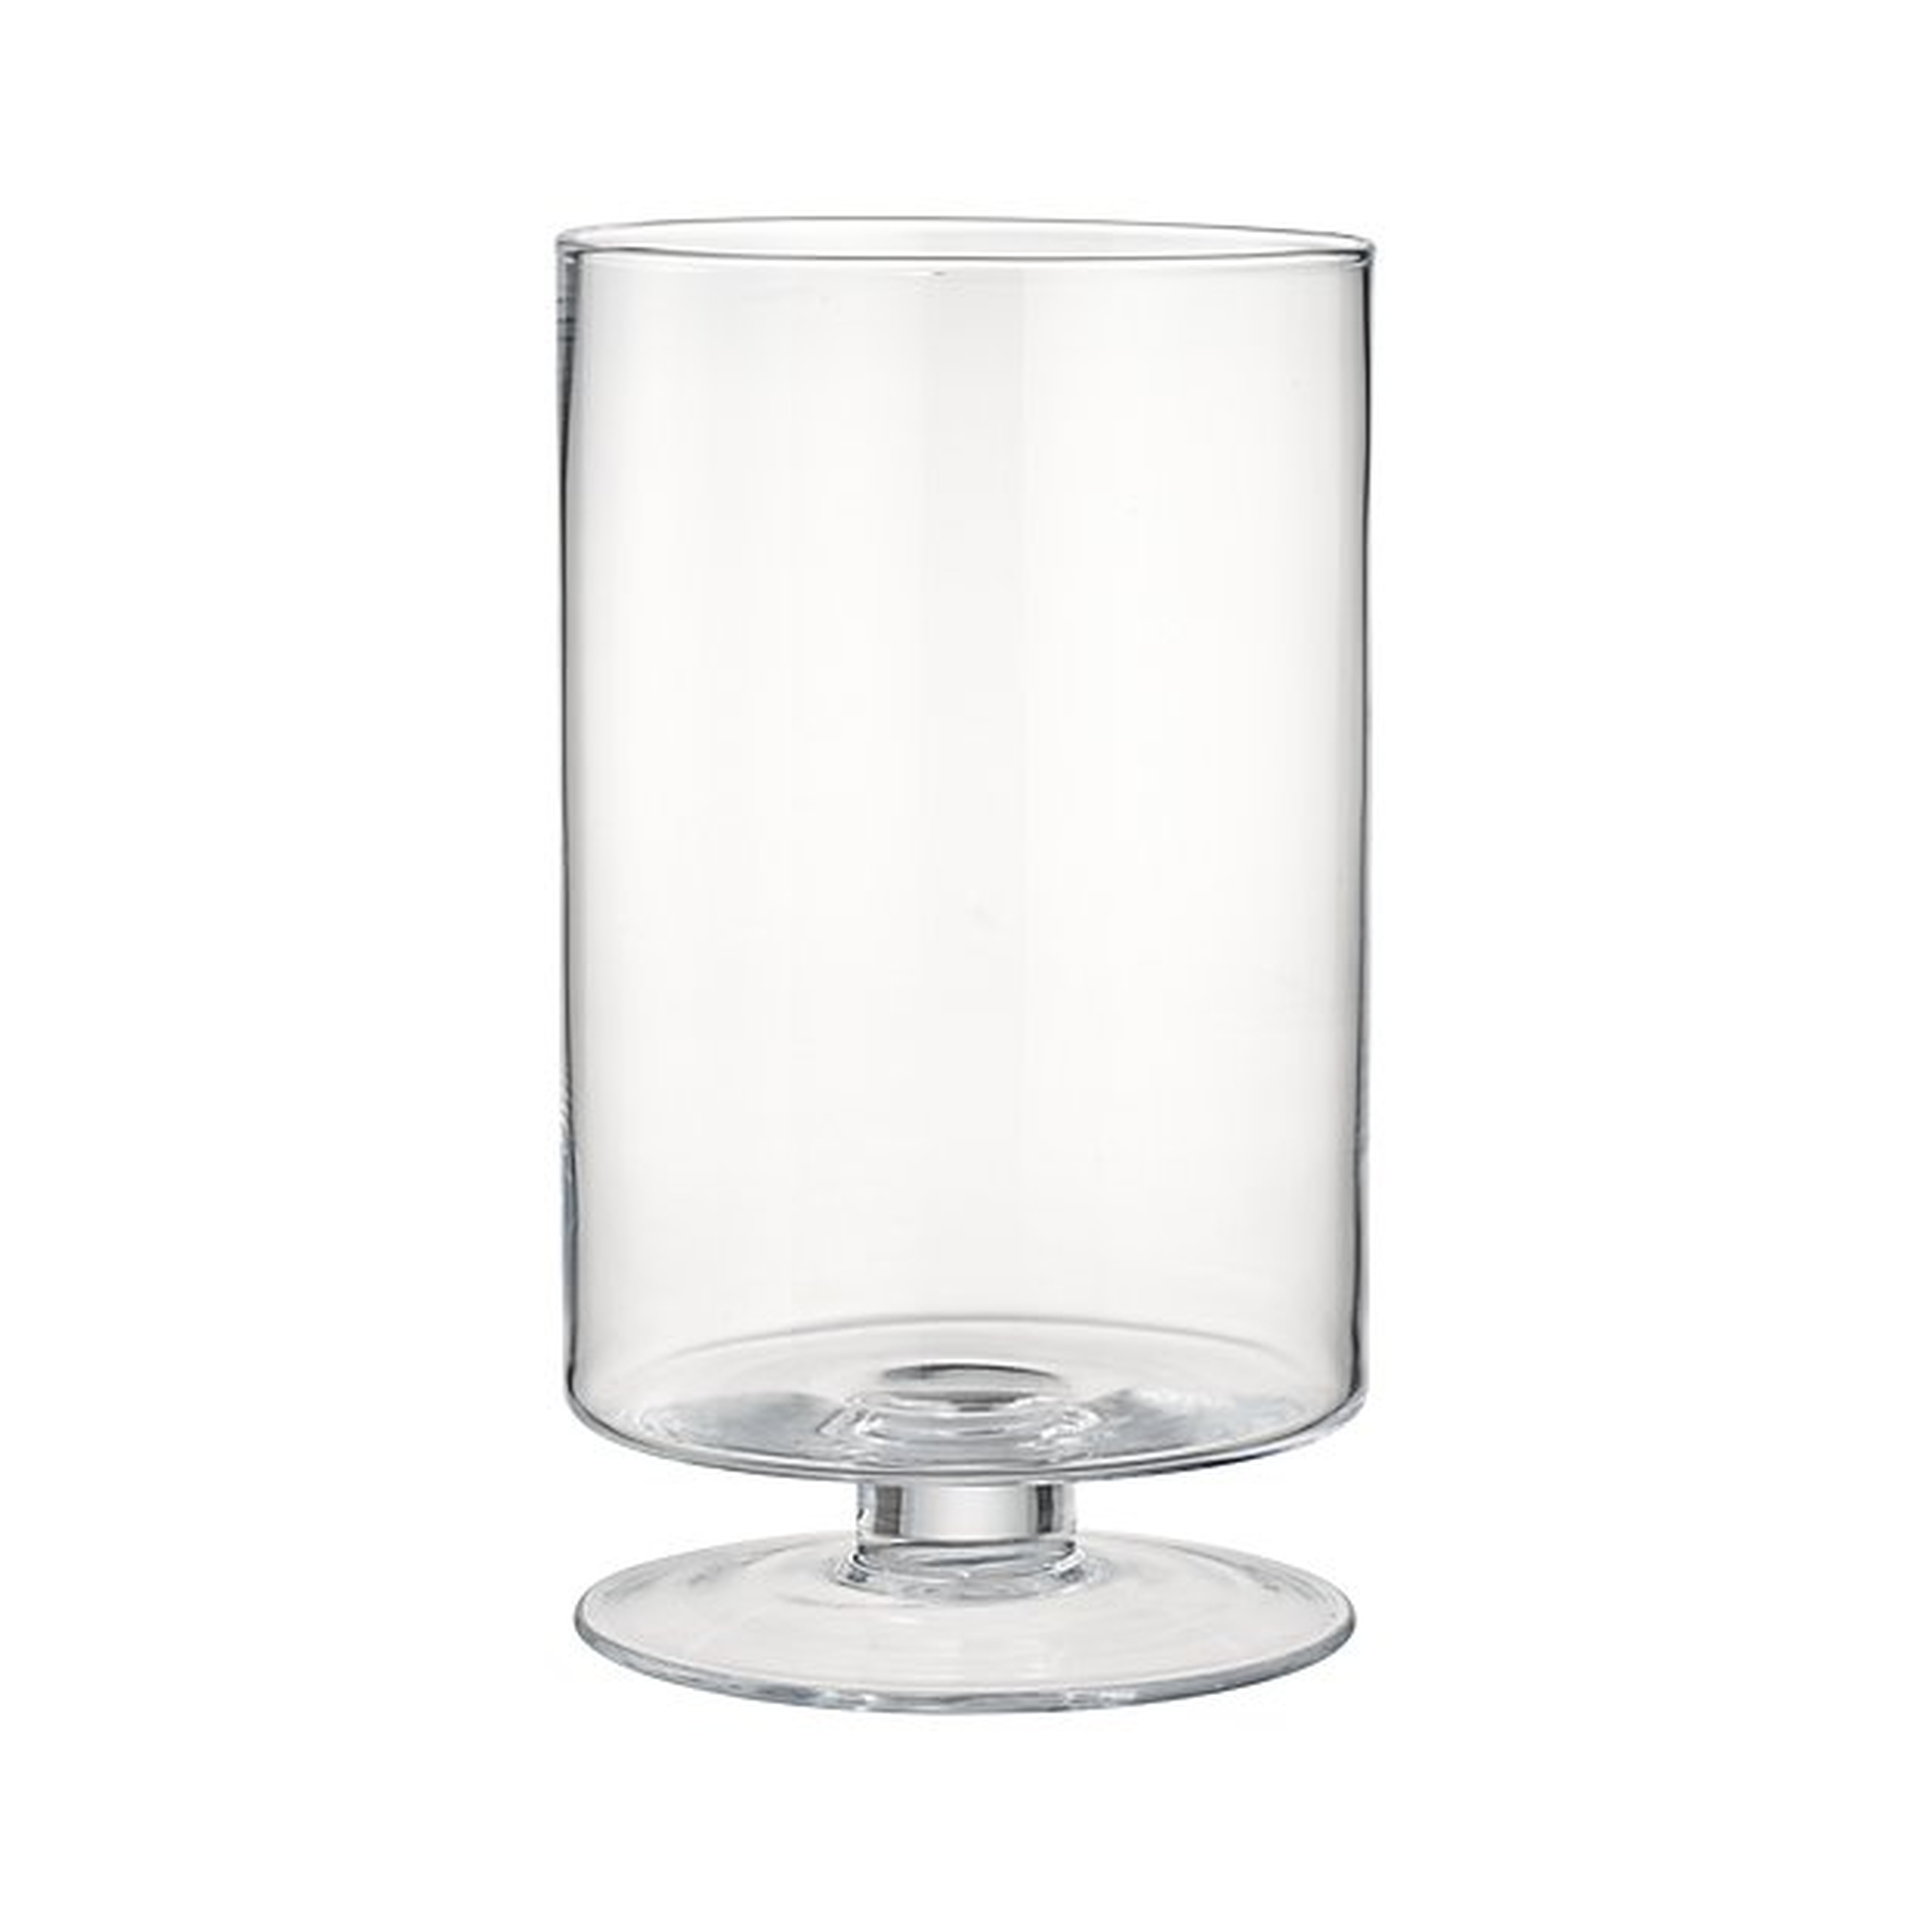 London Large Glass Hurricane Candle Holder Large - Crate and Barrel